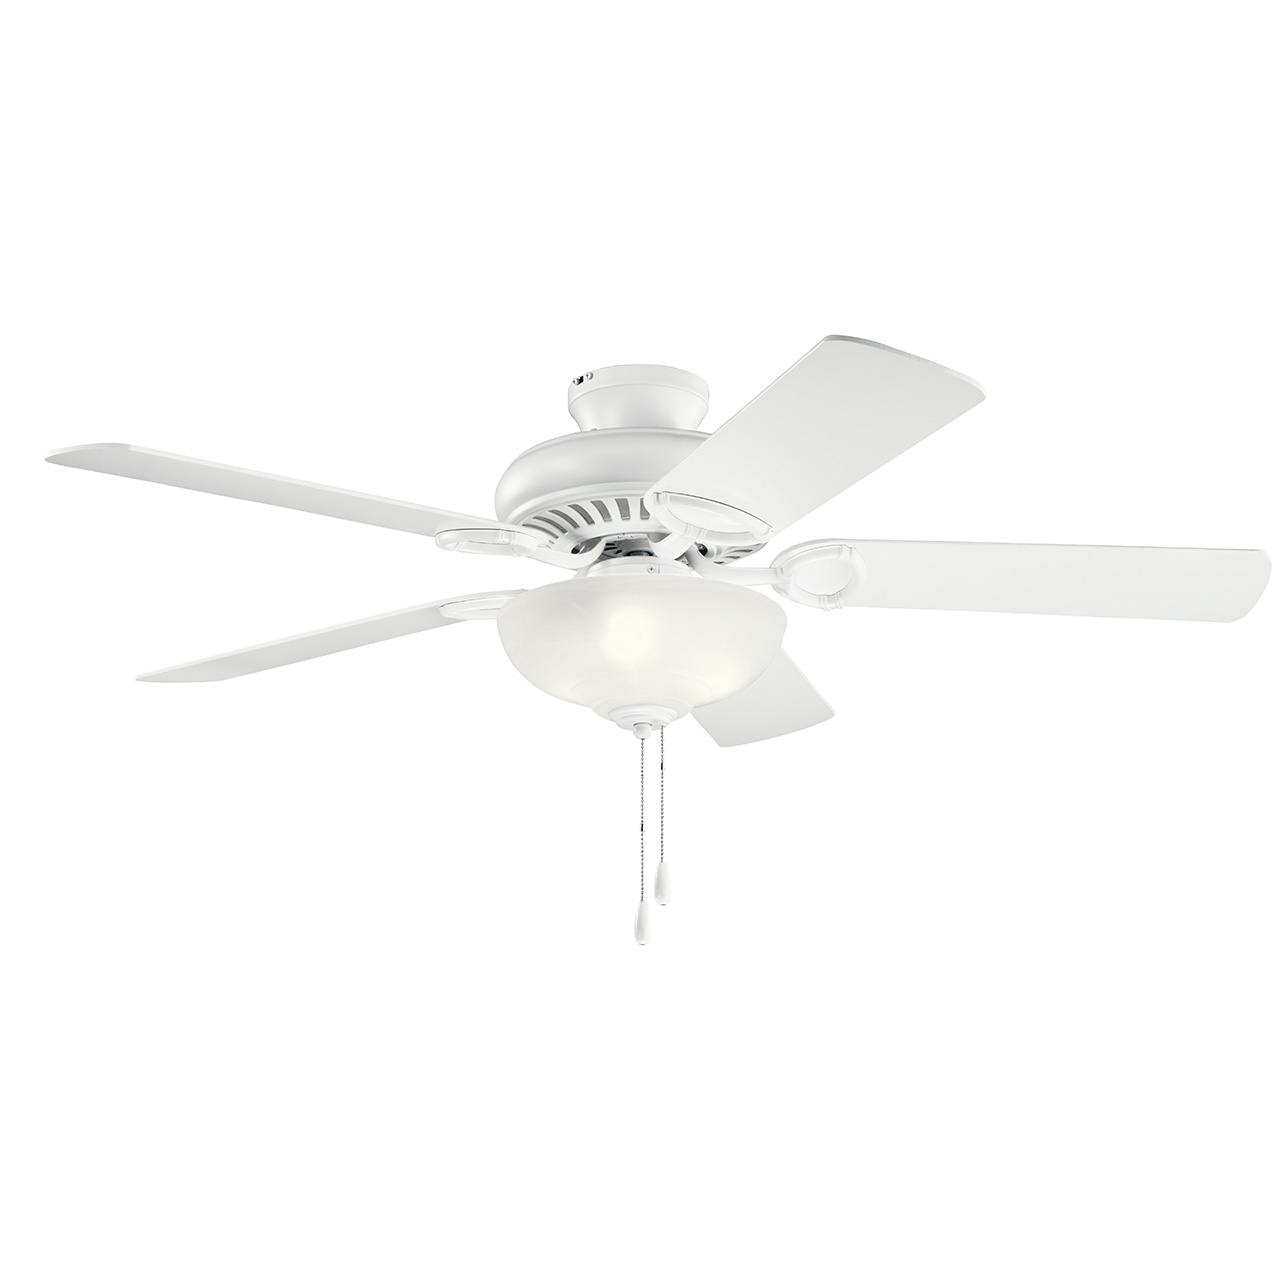 Sutter Place Select 2700K 52" Fan White on a white background